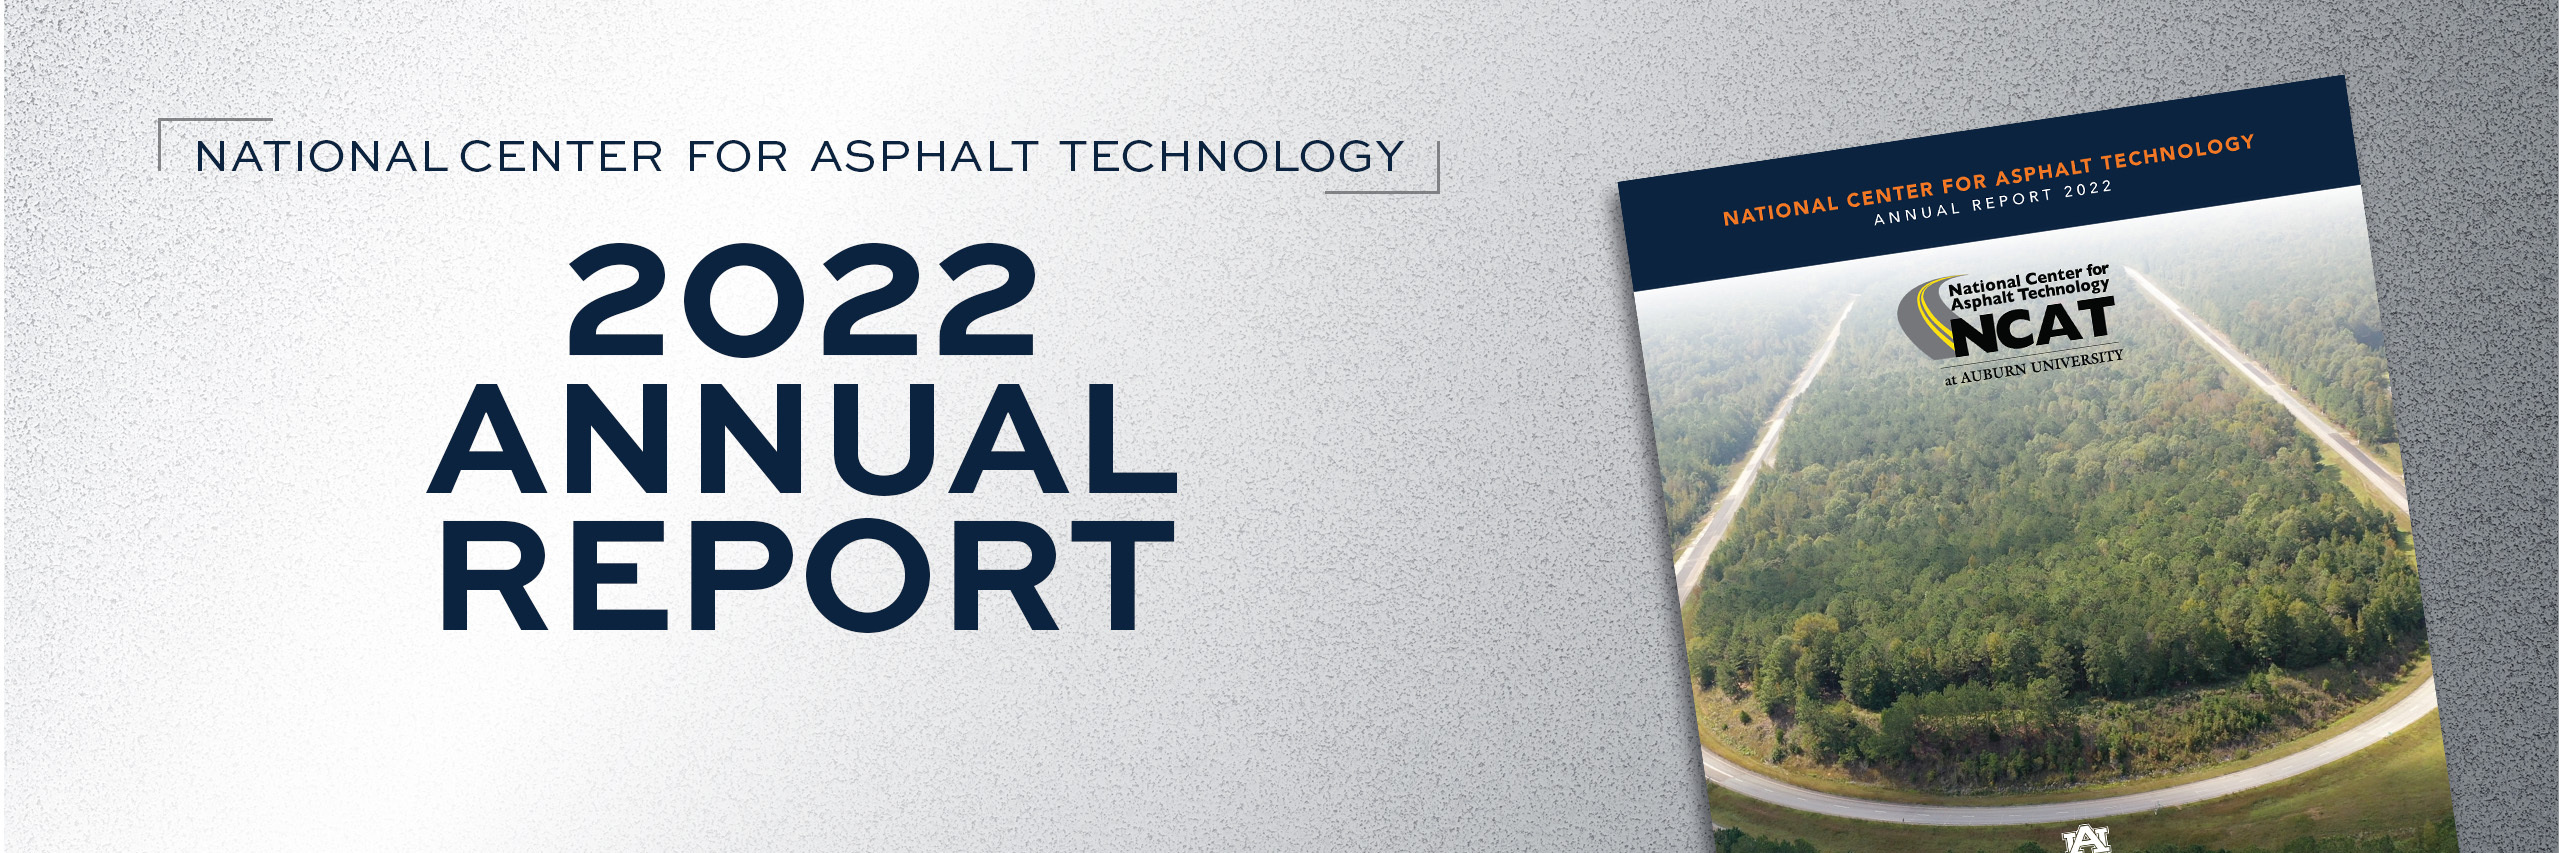 Learn more about NCAT's year in the 2022 Annual Report